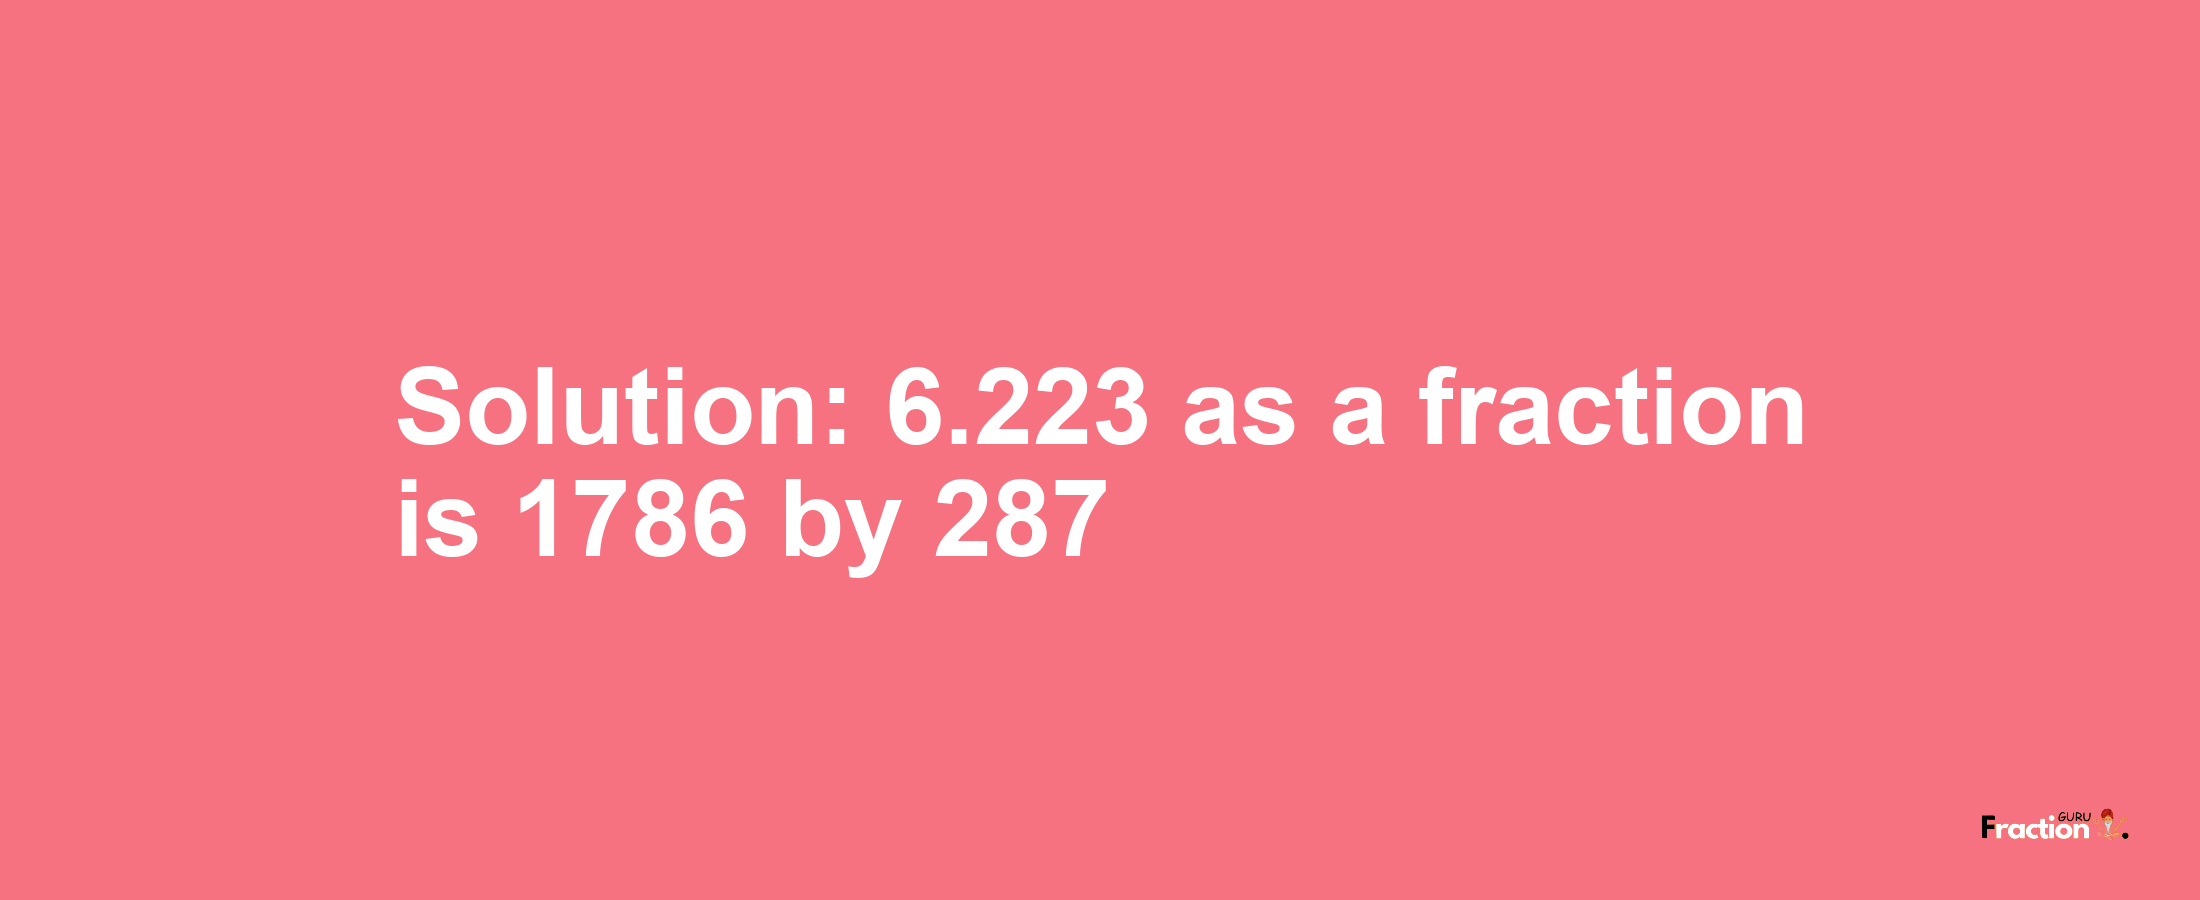 Solution:6.223 as a fraction is 1786/287